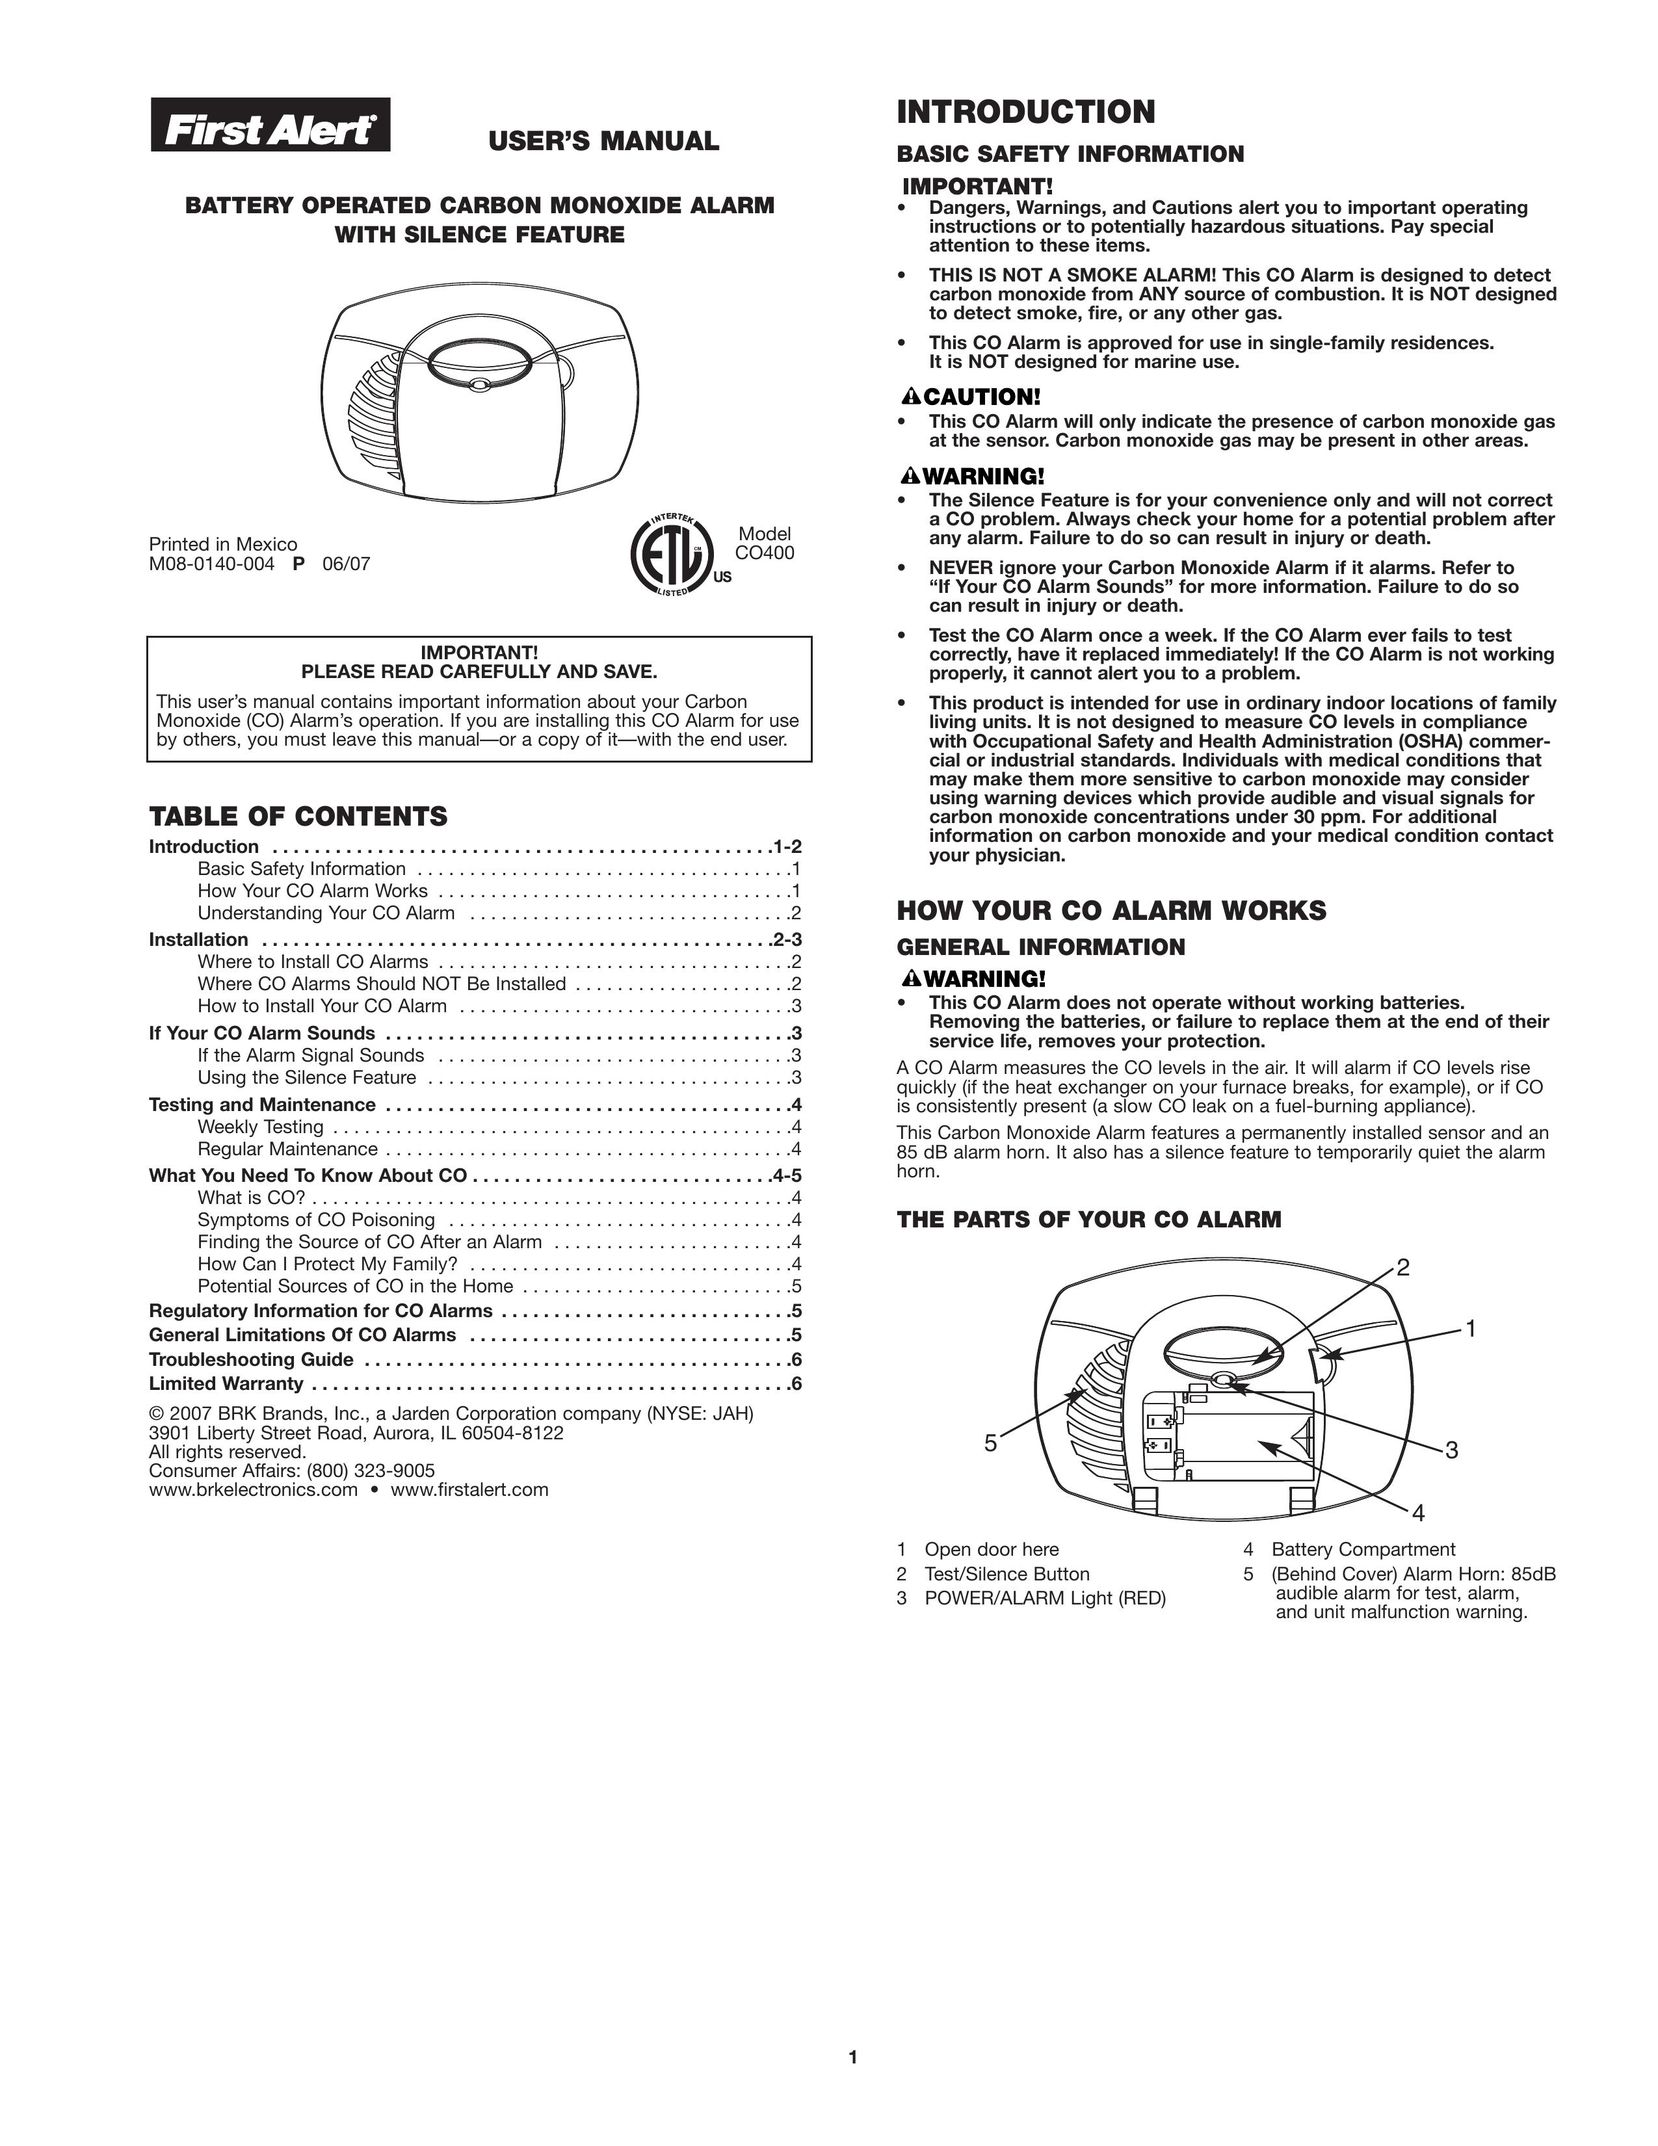 First Alert CO400 Baby Carrier User Manual (Page 1)